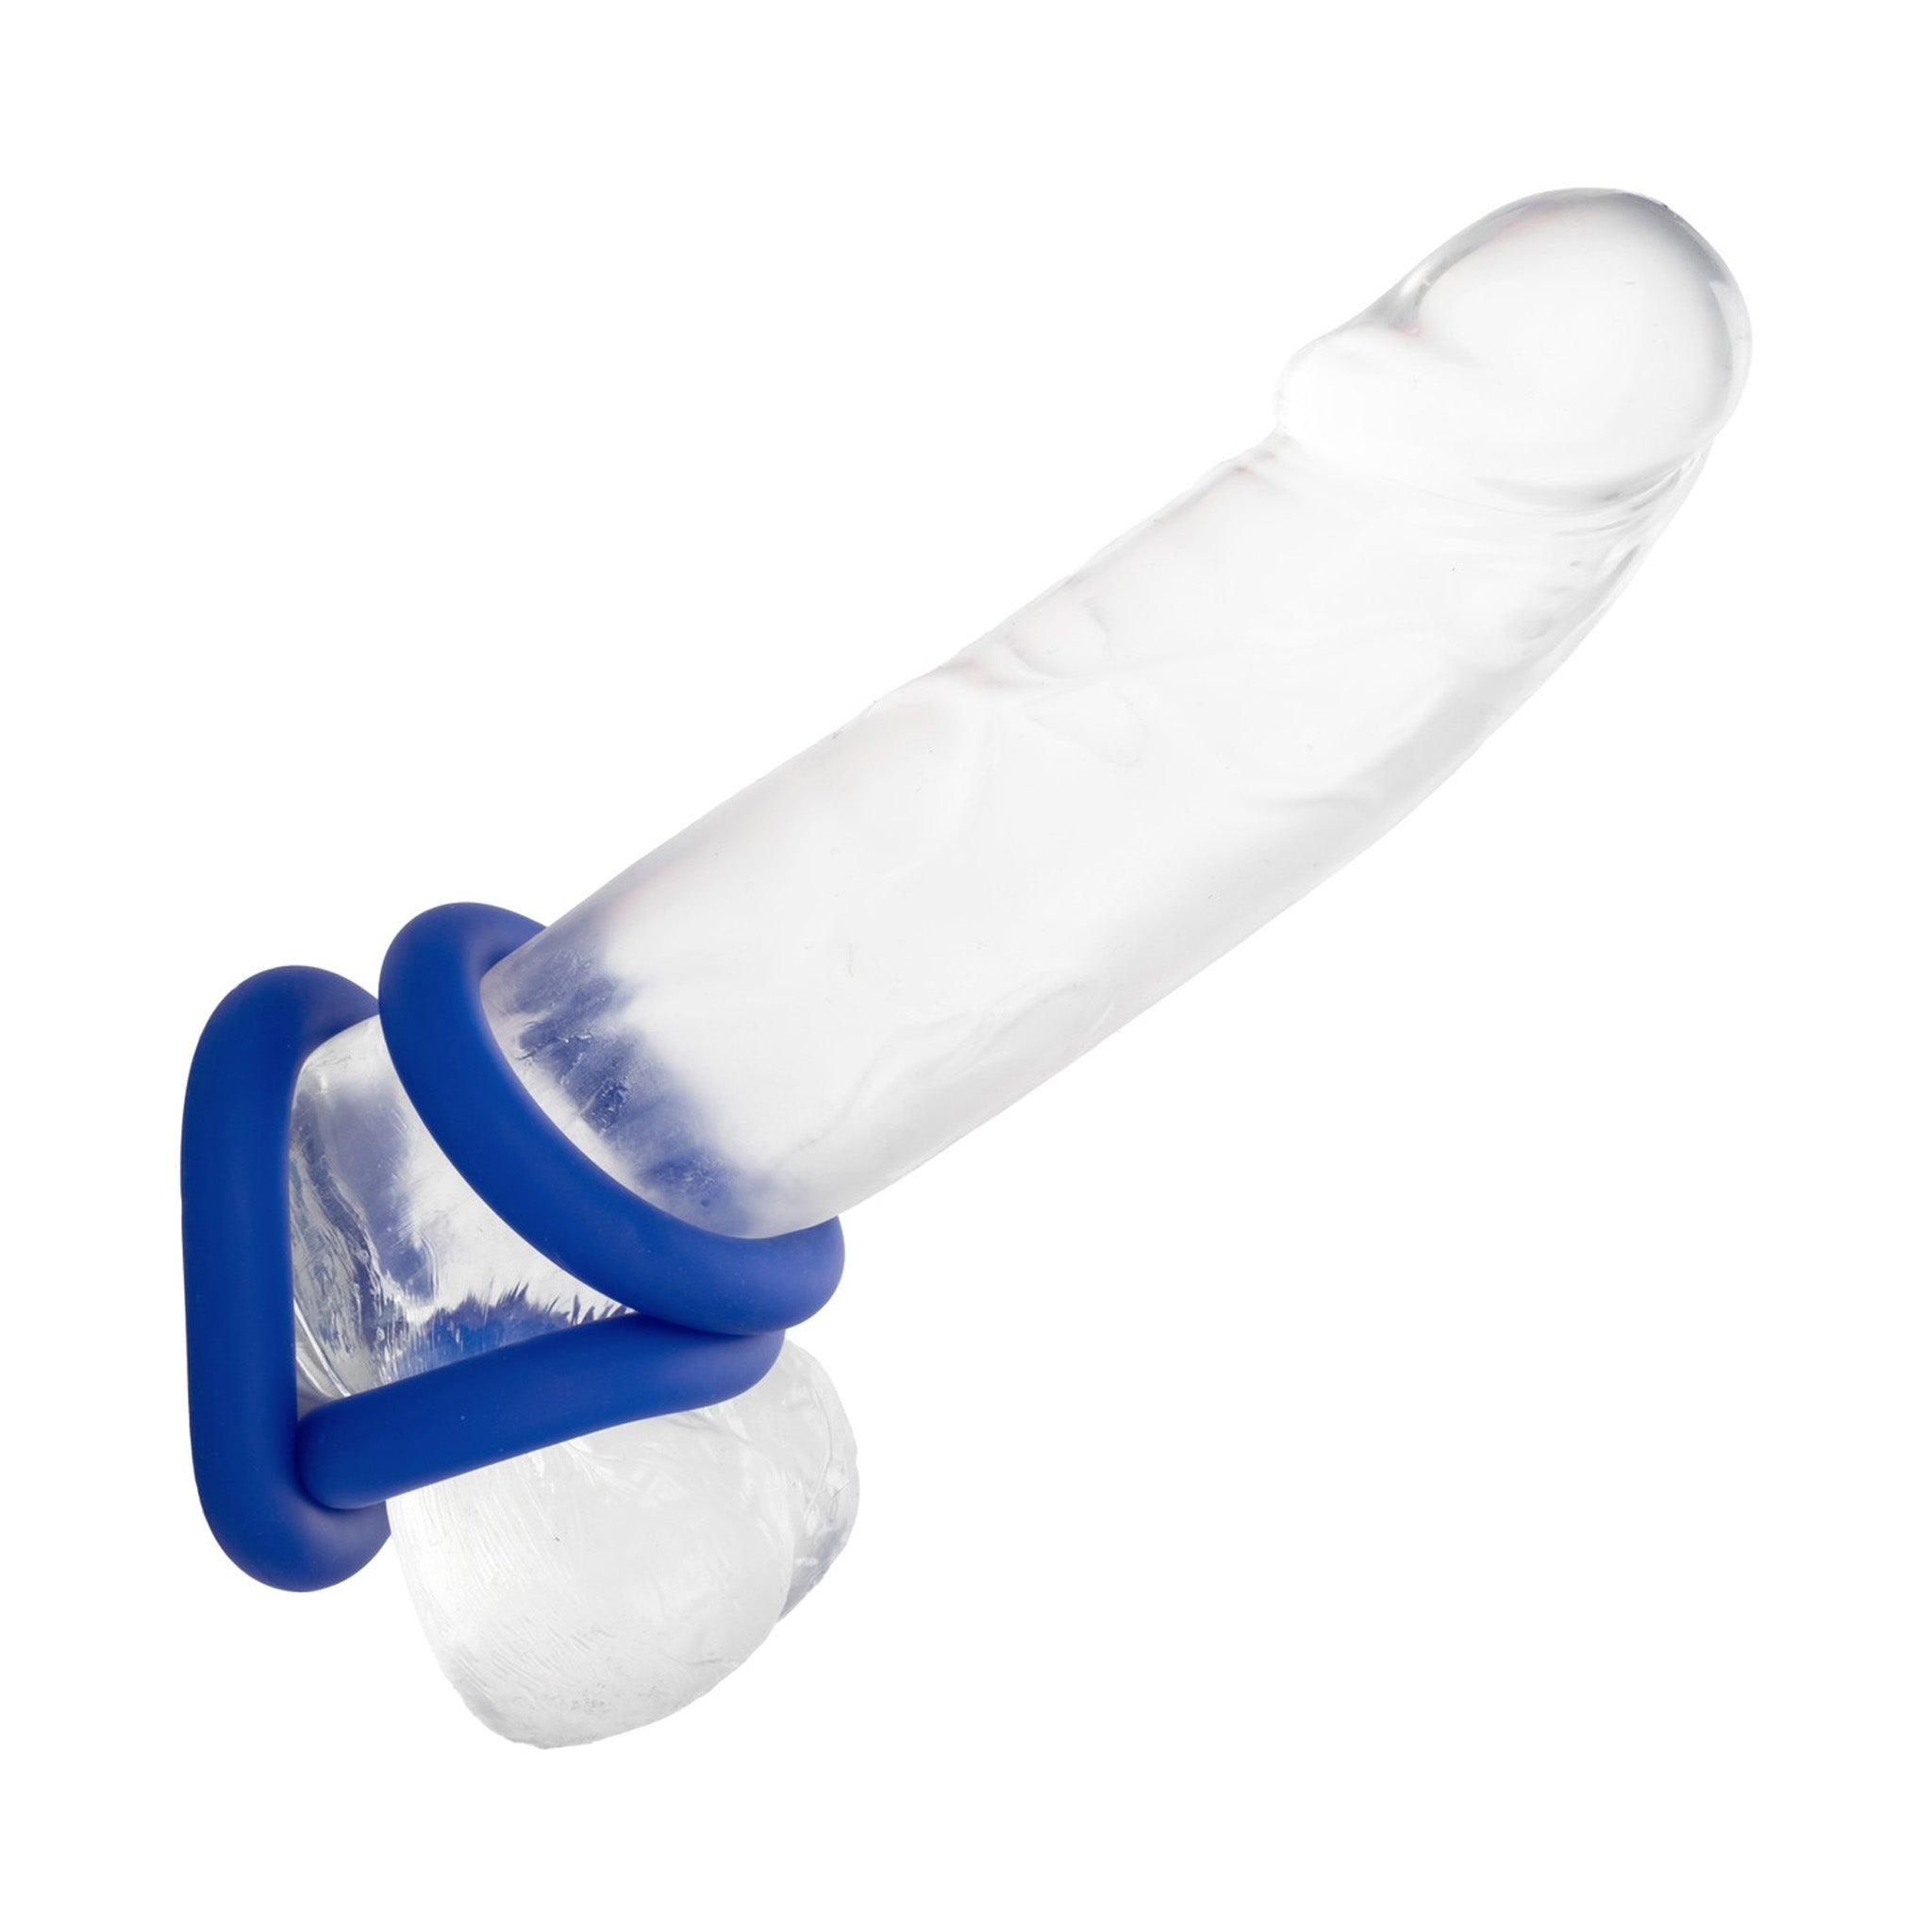 Admiral Universal Silicone 3 Piece C-Ring Set - CheapLubes.com